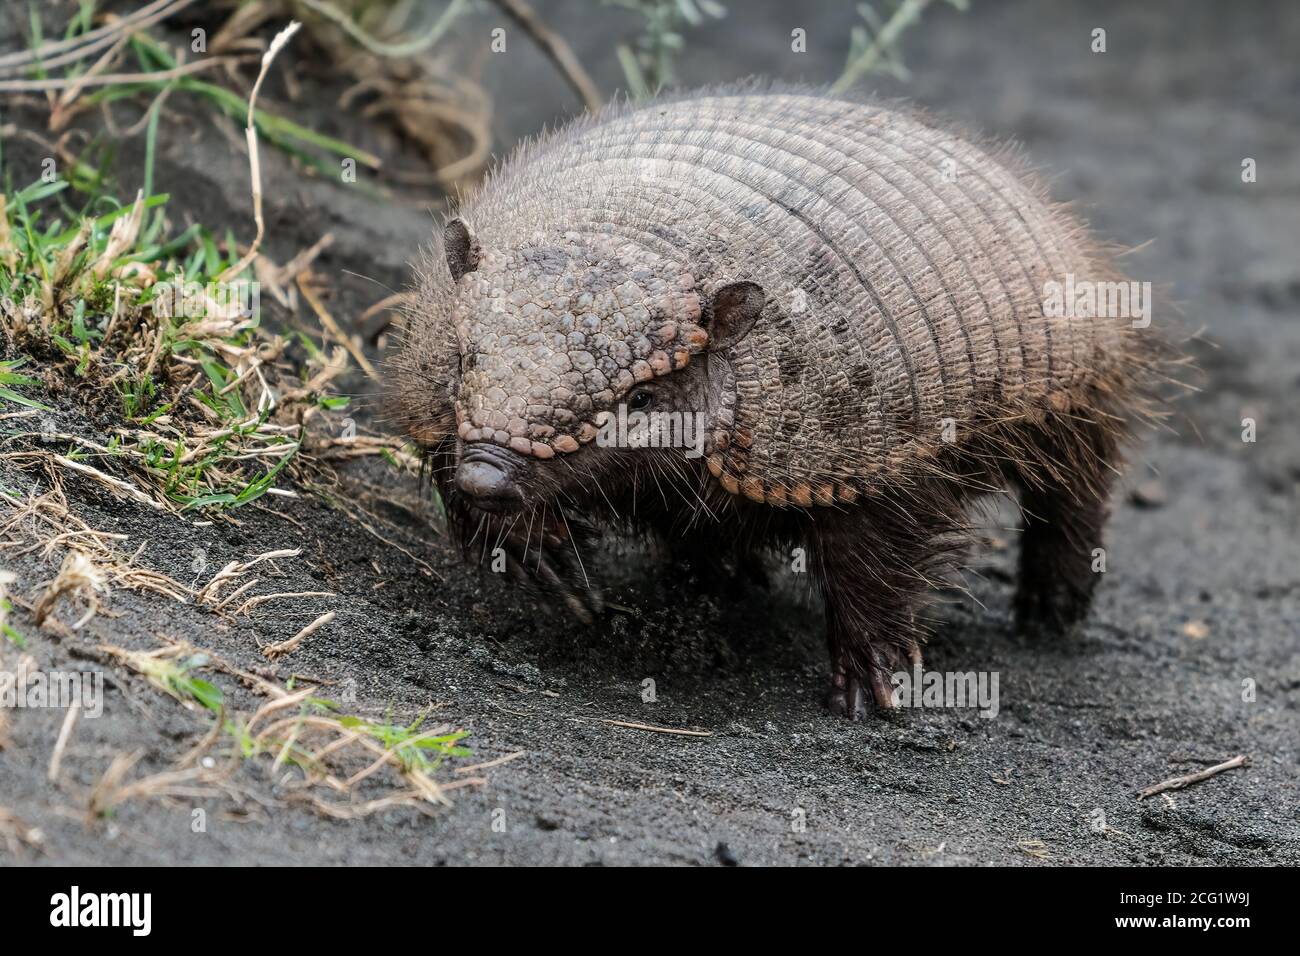 The Big Hairy Armadillo, Chaetophractus villosus, is the largest and most  numerous of the armadillo species in South America. Torres del Paine Nation  Stock Photo - Alamy